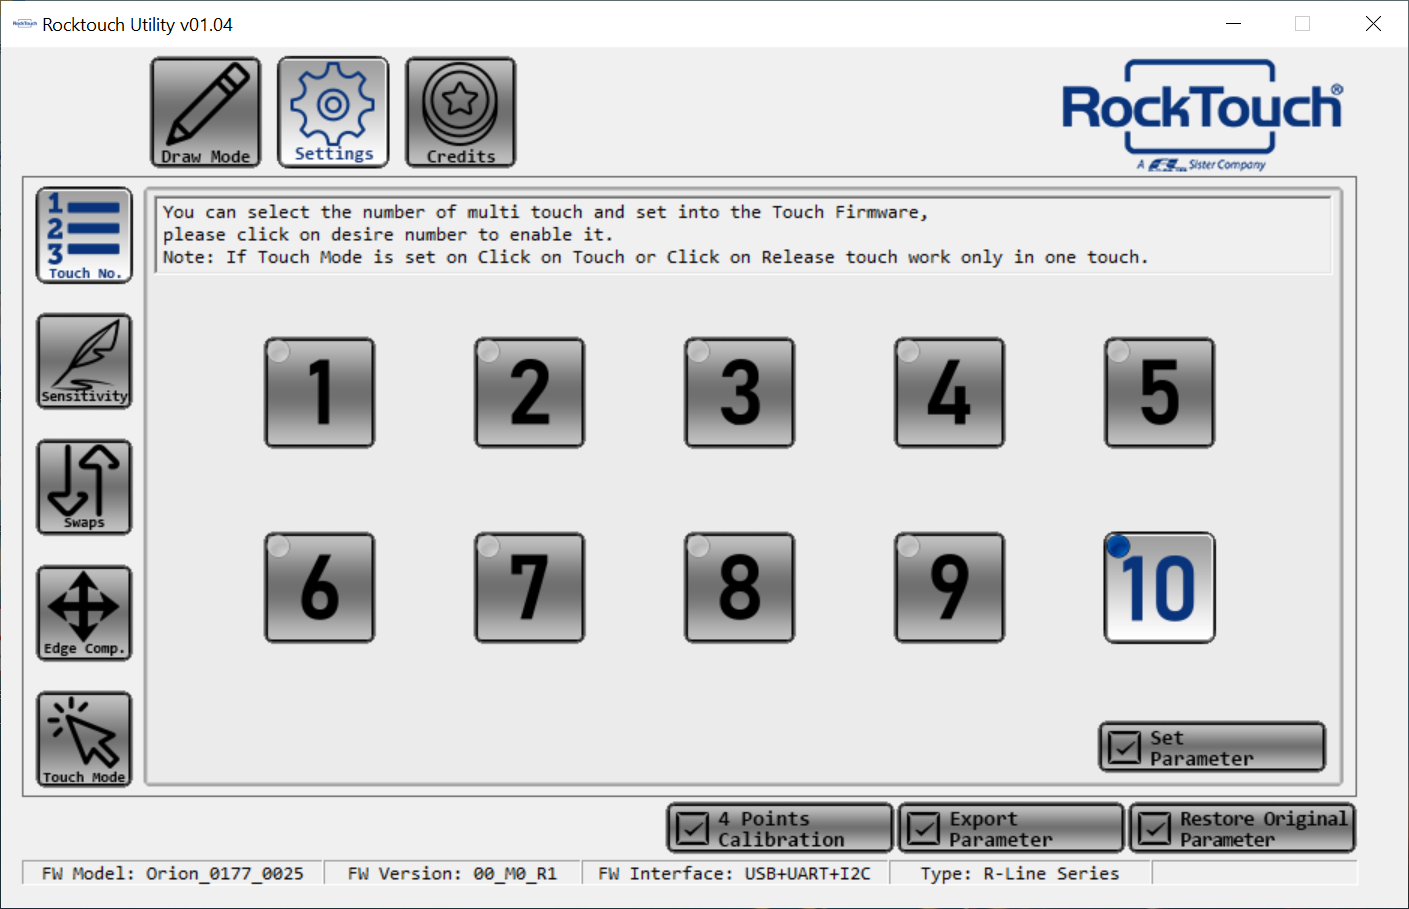 WYSIWYG - Rocktouch utility ver 01.04 „Touch No.png